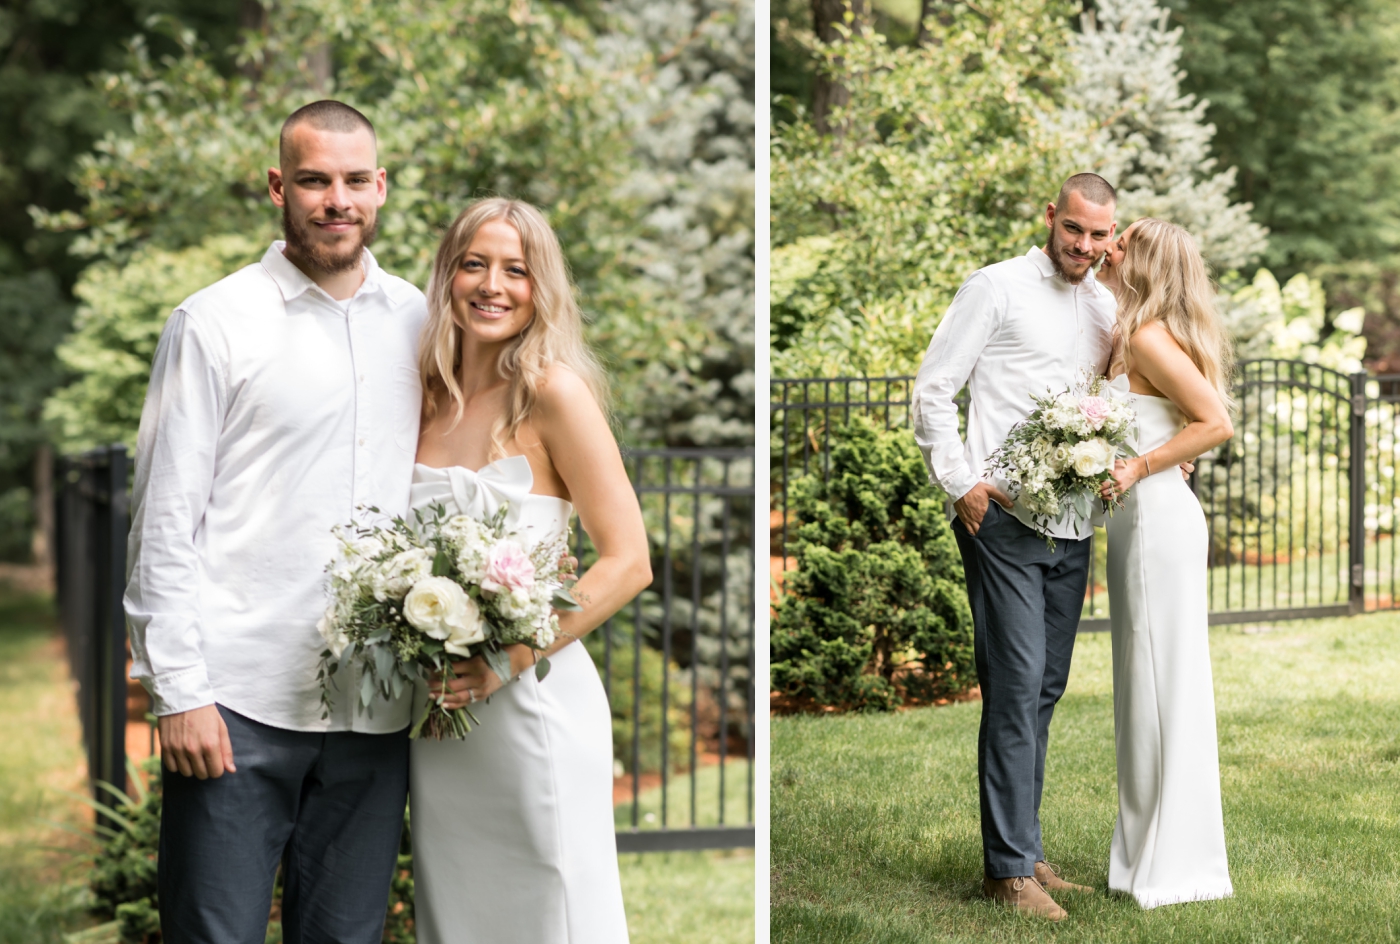 Bride and groom portraits in a private backyard in New England